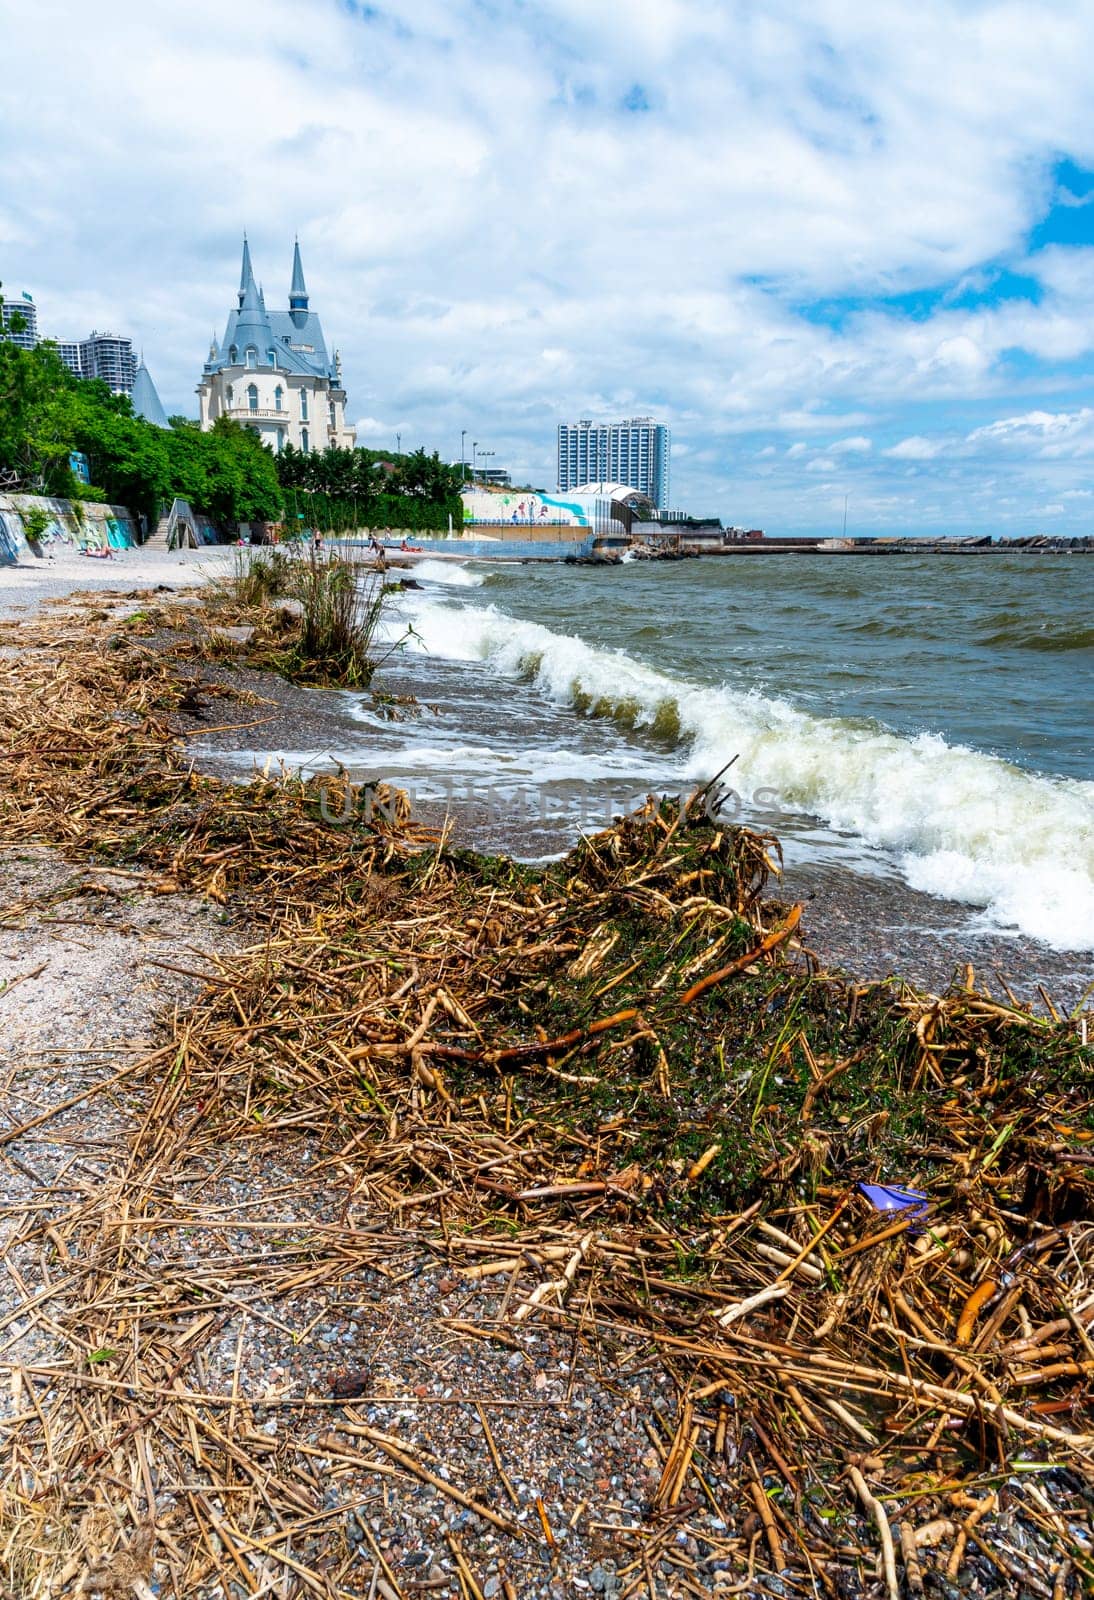 Consequences of the Accident at the Kakhovka power plant, pollution of the beaches of Odessa with garbage and plant remains brought by water by Hydrobiolog